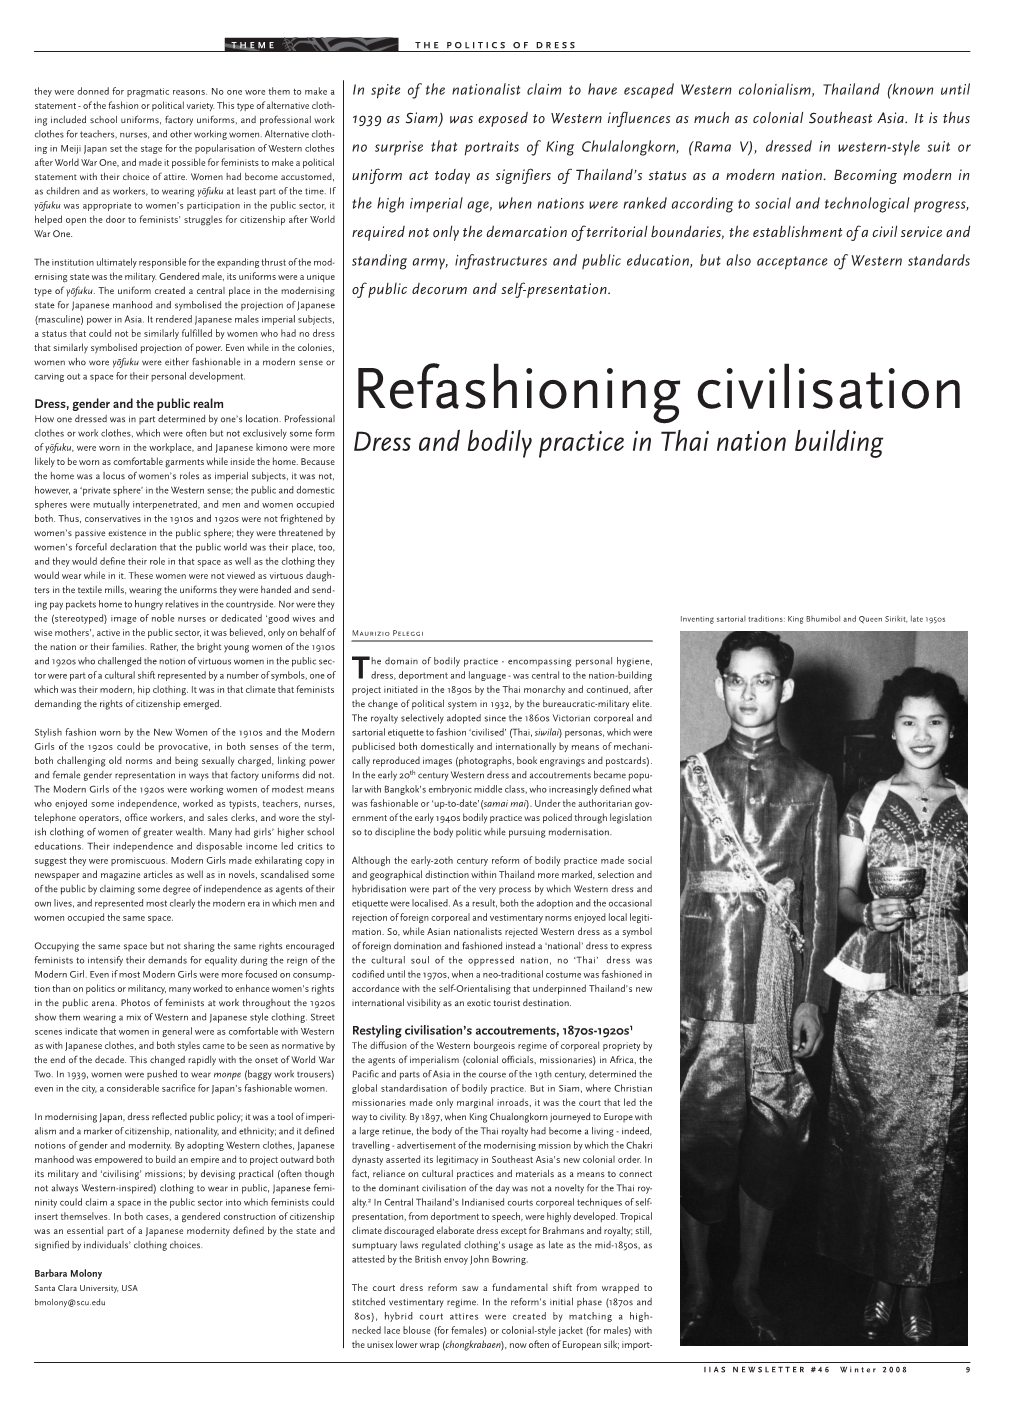 Refashioning Civilisation How One Dressed Was in Part Determined by One’S Location